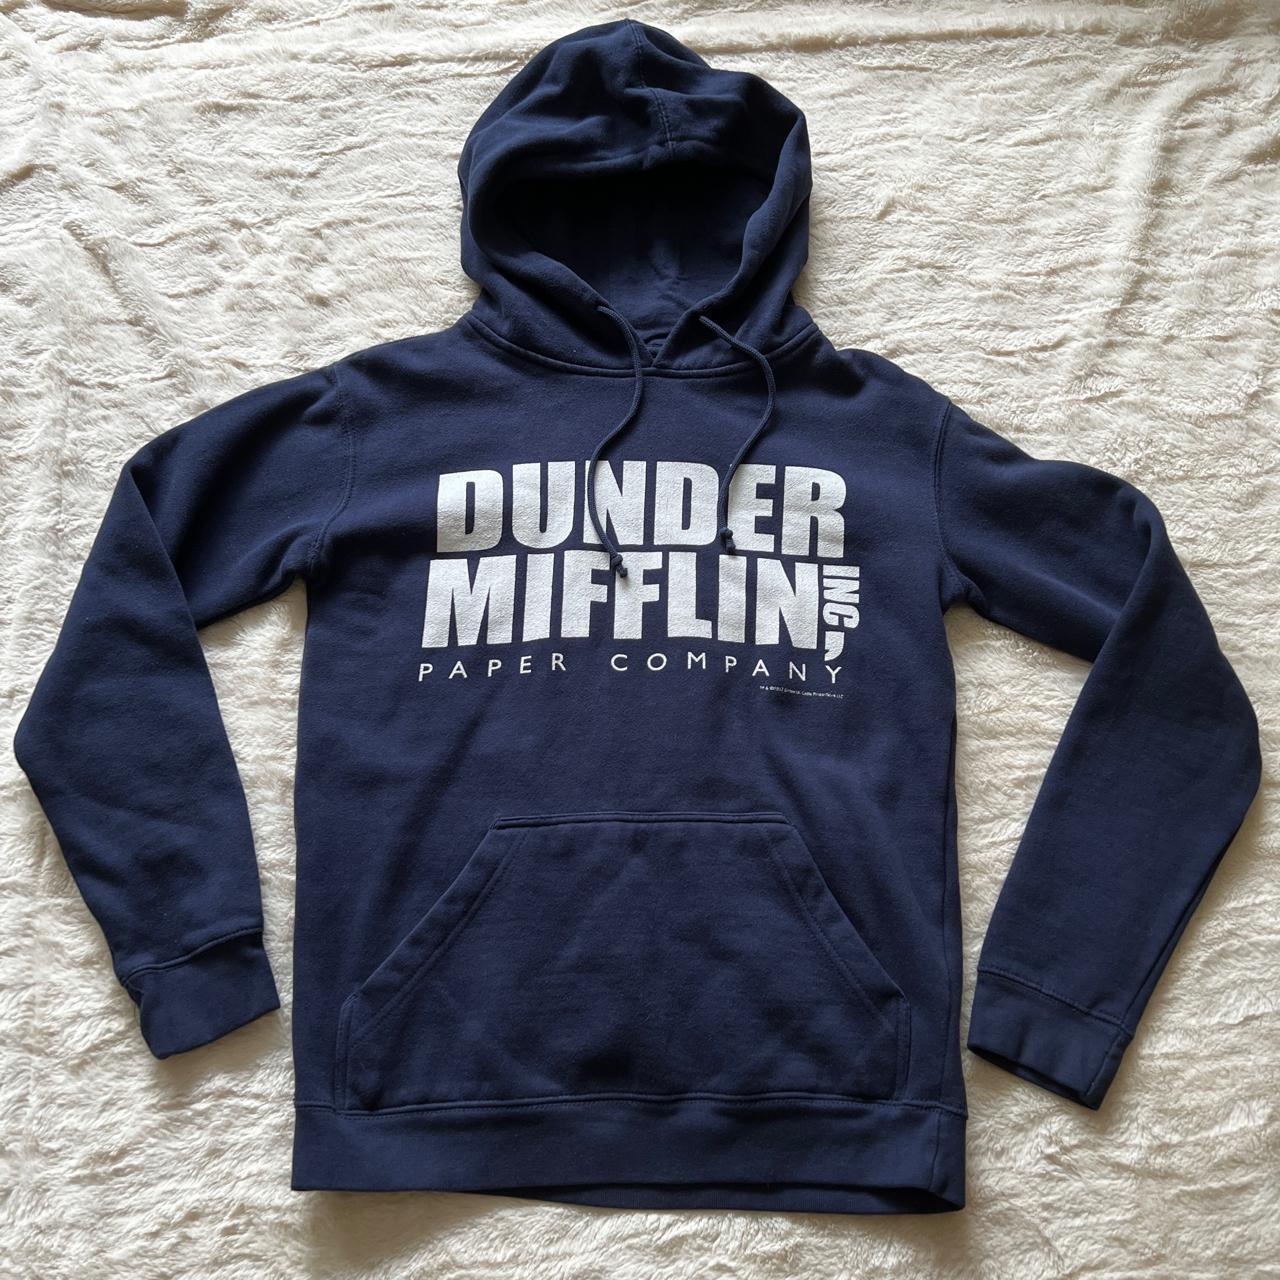 Product Image 1 - Dunder Mifflin INC Paper Company
Navy